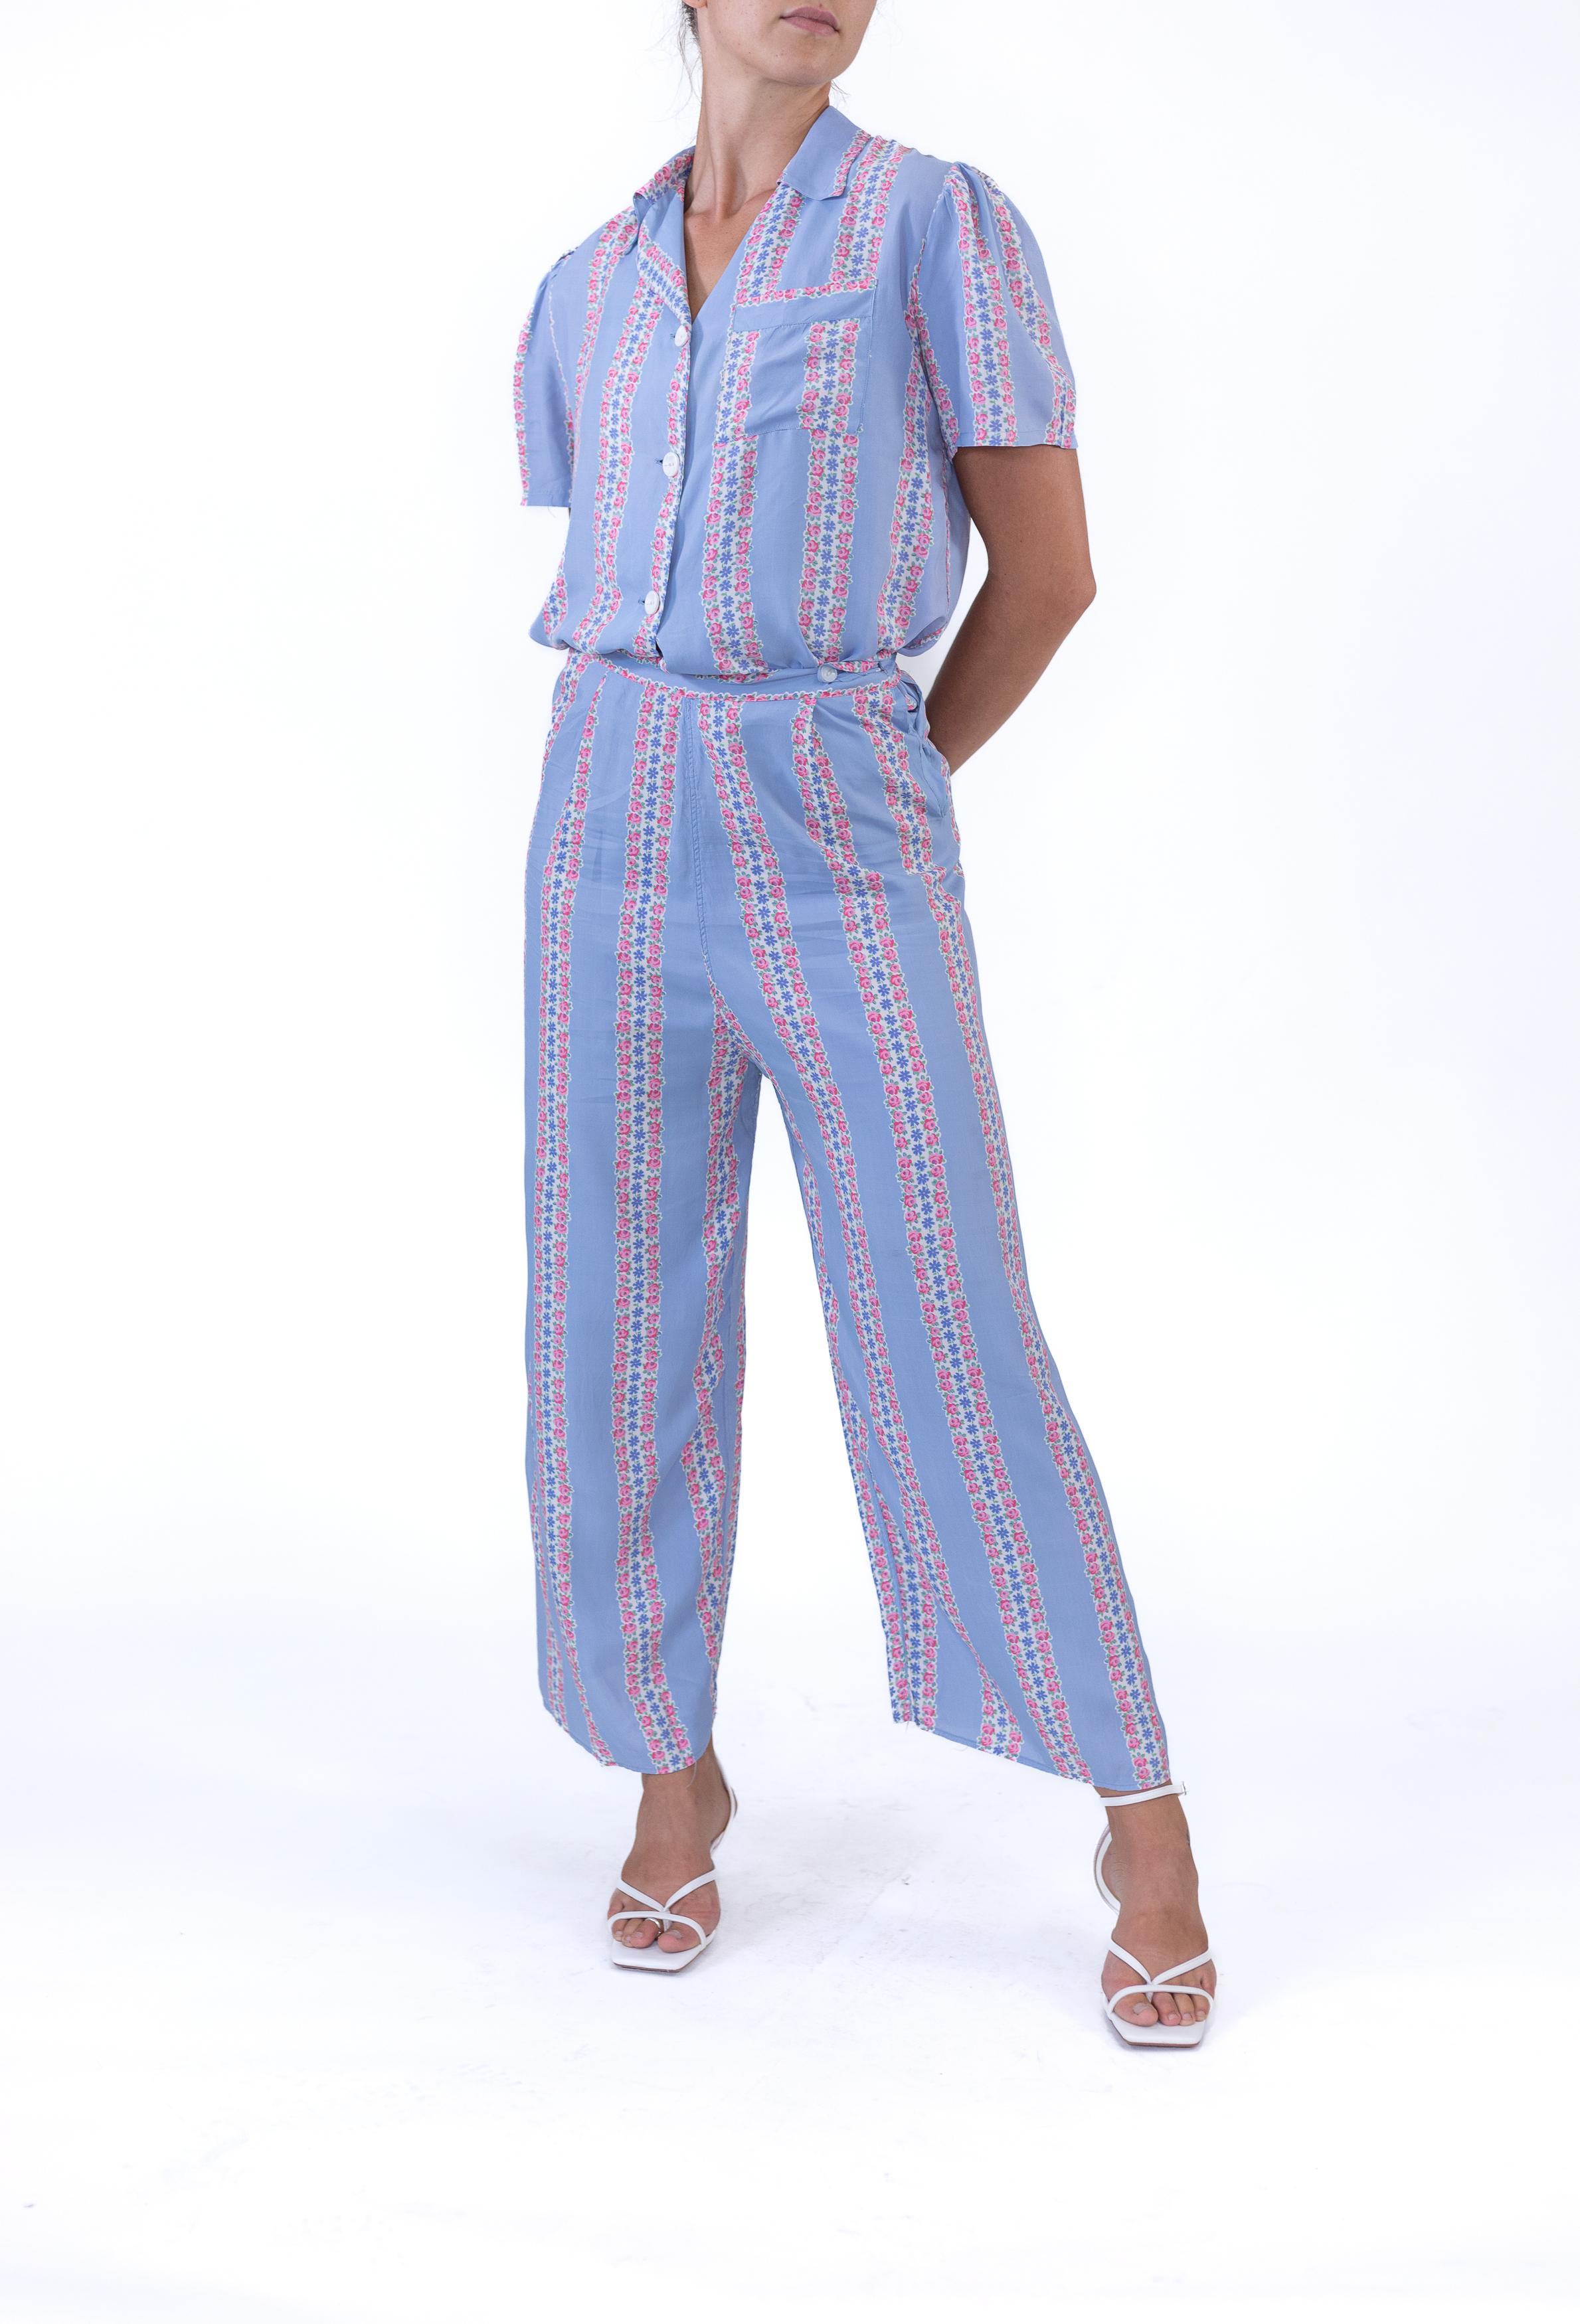 Women's 1940S SLUMBERJAM Blue & Pink Rayon Striped Floral Print Top And Bottom Pajamas For Sale